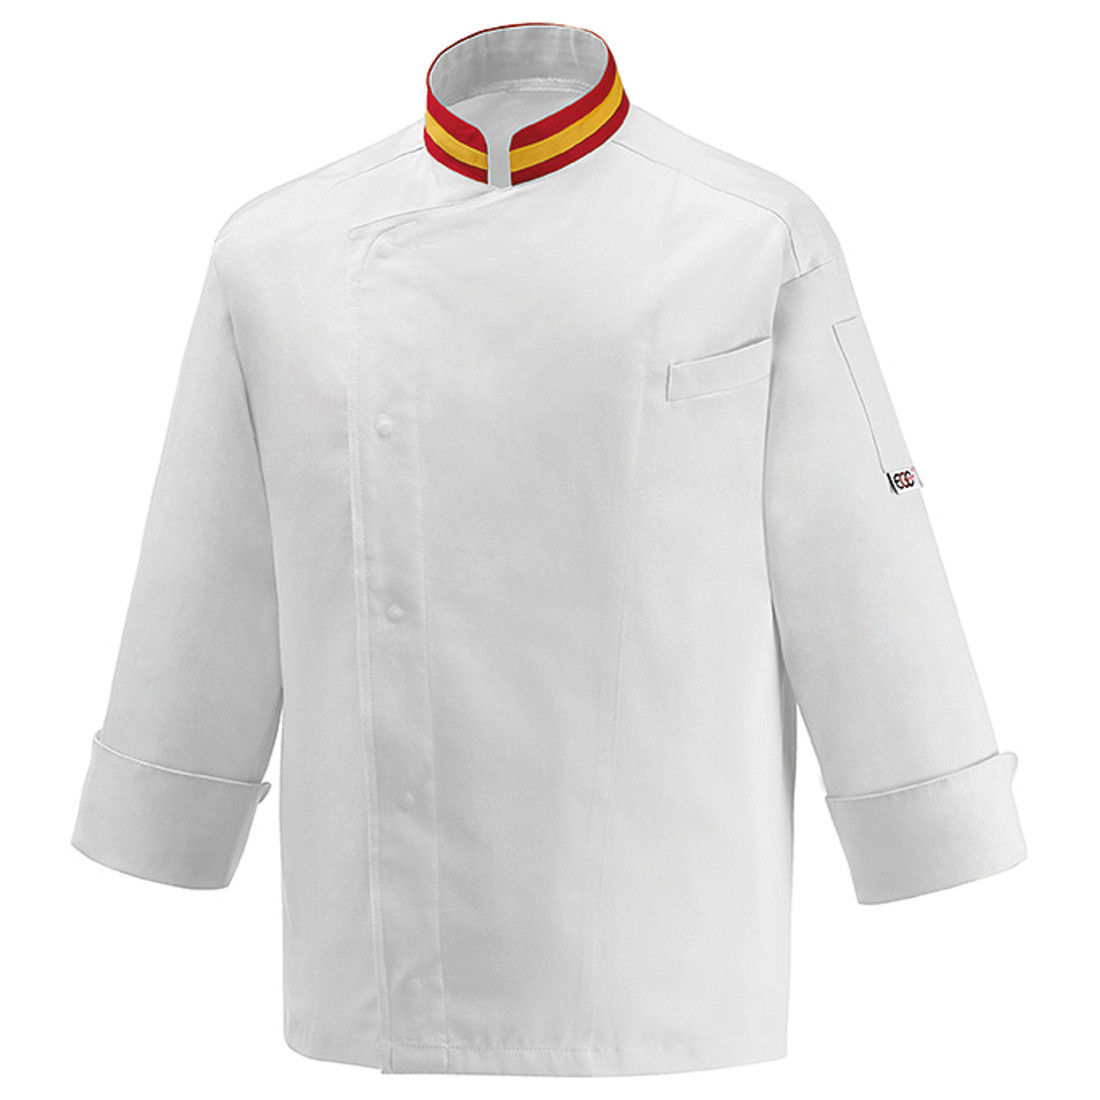 Nations Chef's Jacket - Safetywear